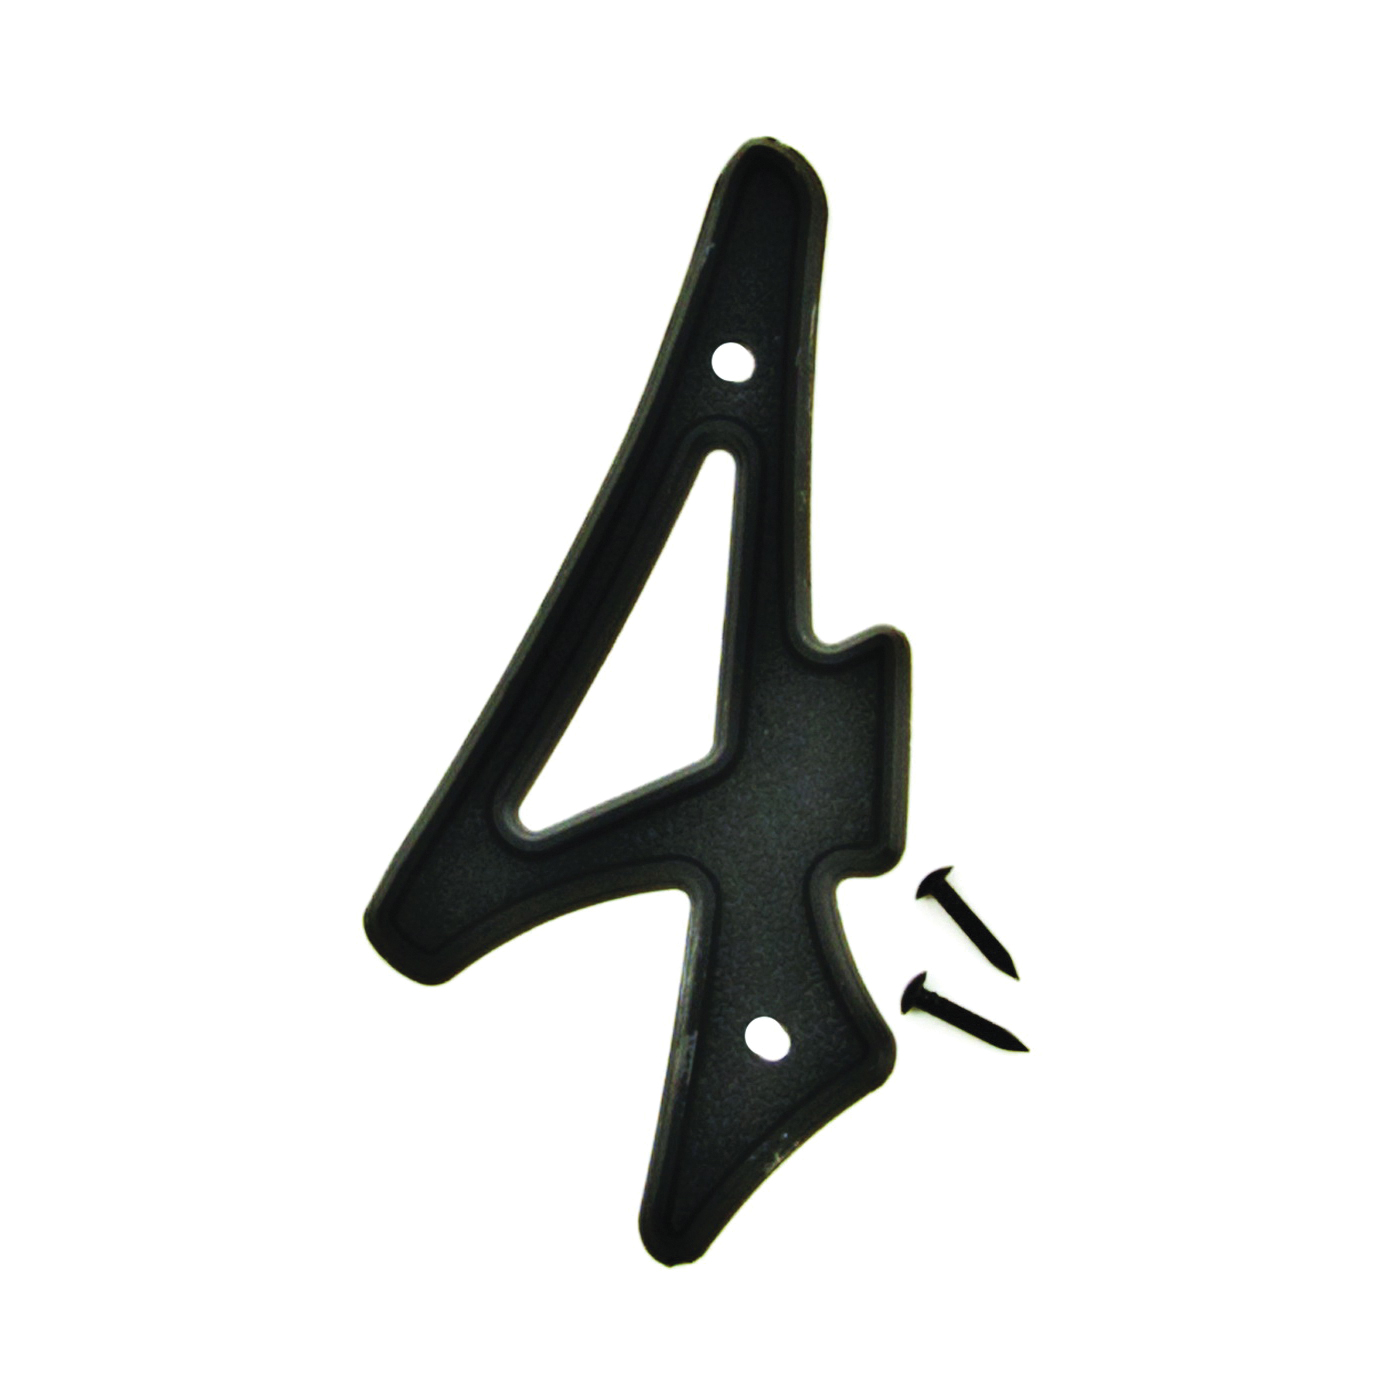 HY-KO PN-29/4 House Number, Character: 4, 4 in H Character, Black Character, Plastic - 1